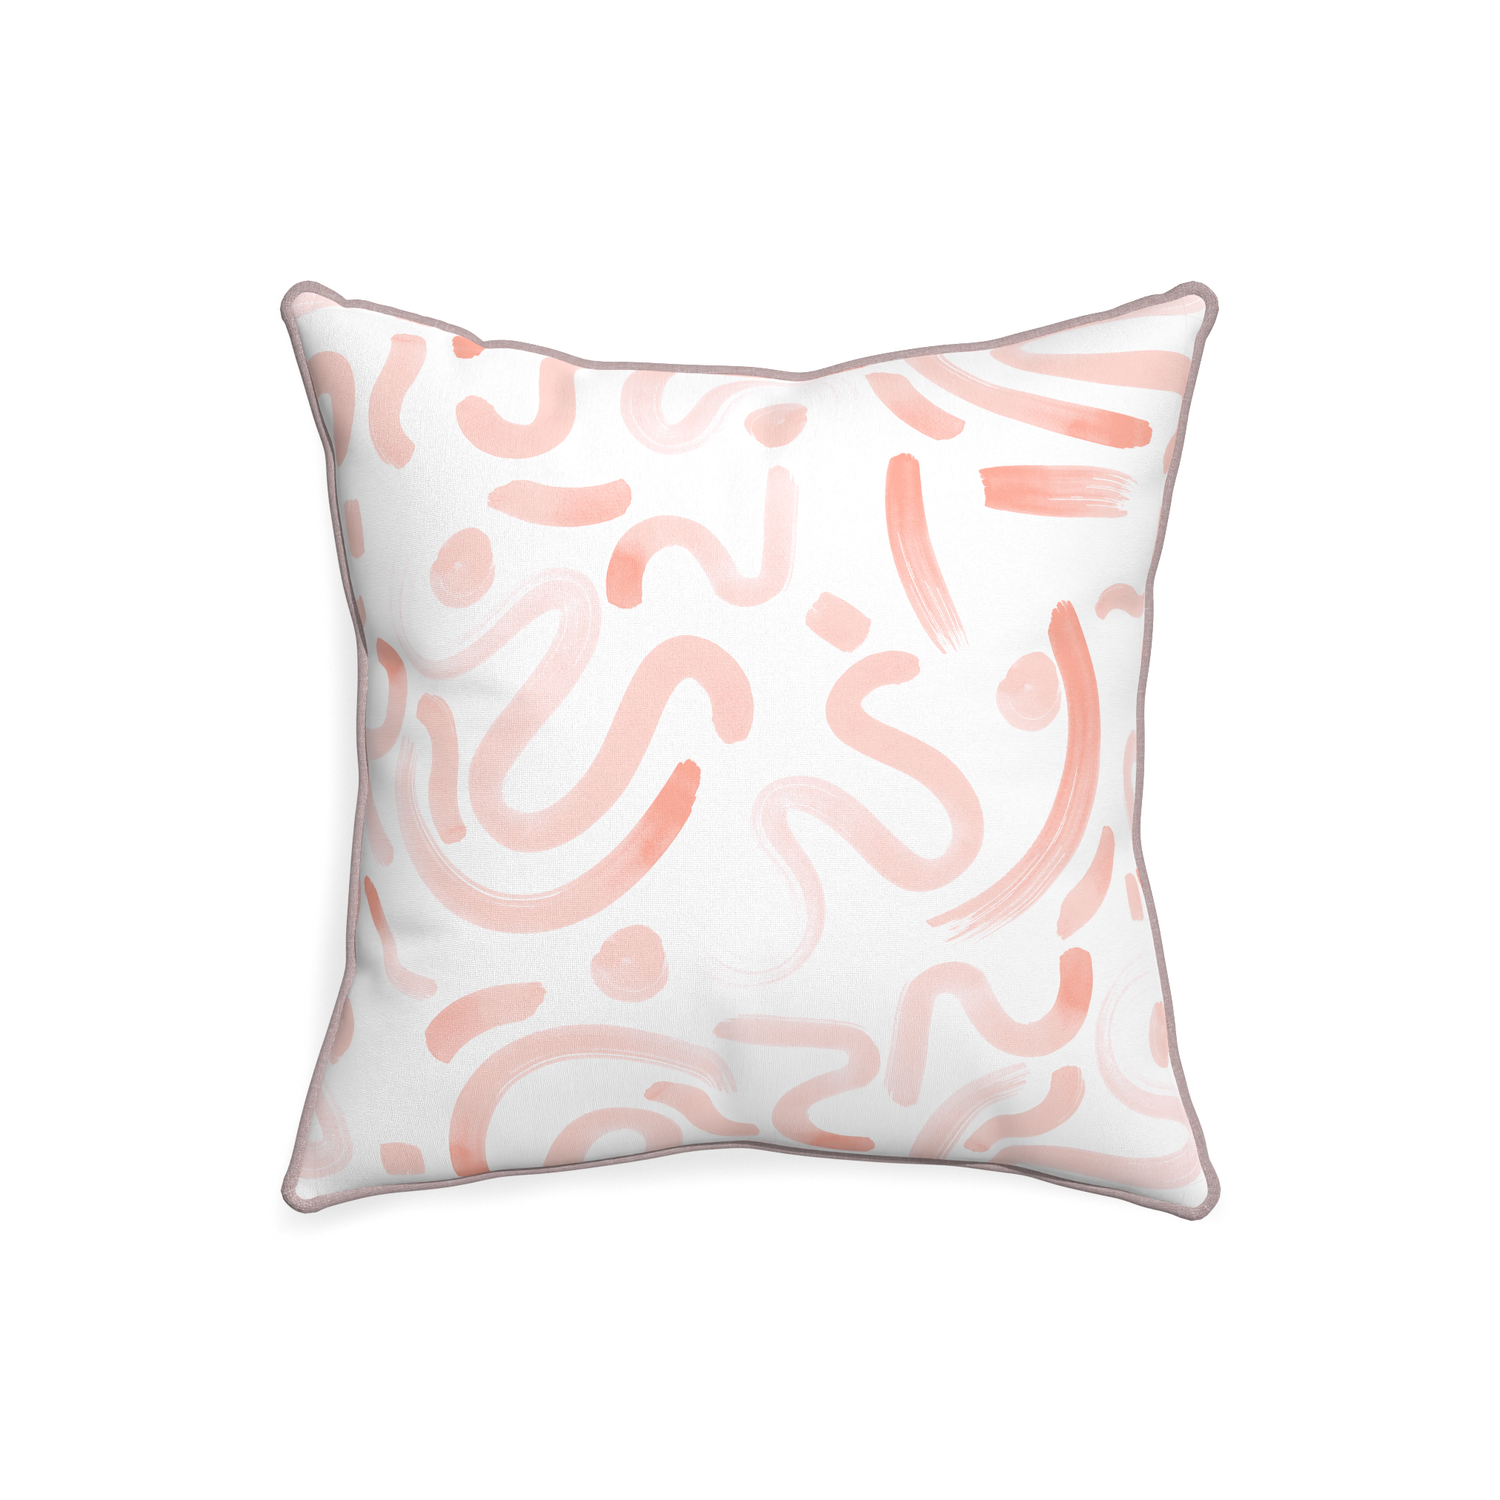 20-square hockney pink custom pink graphicpillow with orchid piping on white background